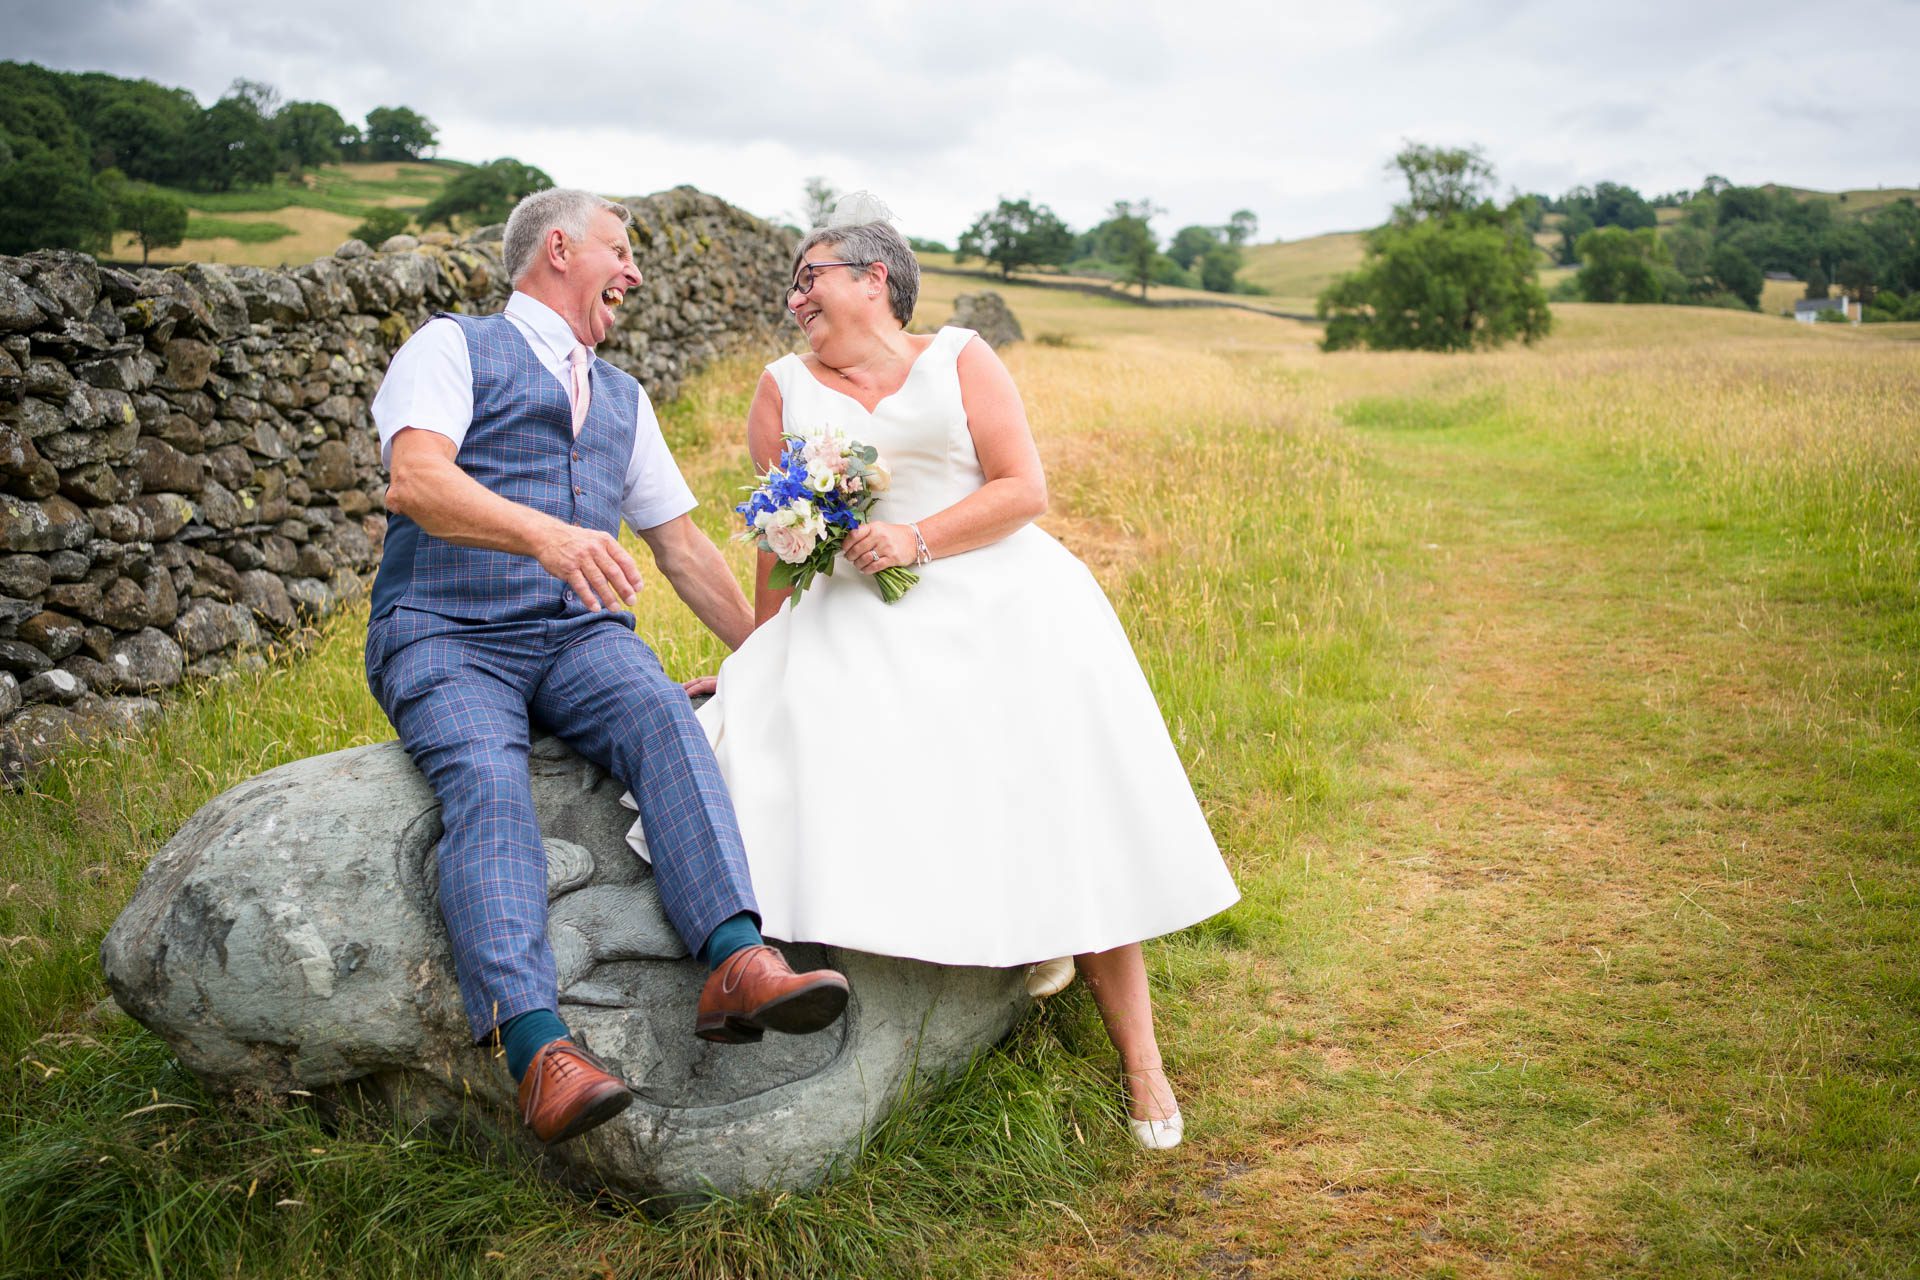 Bride and groom sitting on rock laughing. Dry stone wall, meadow and rolling hills in background. Taken at their Low Wood Bay Resort wedding.